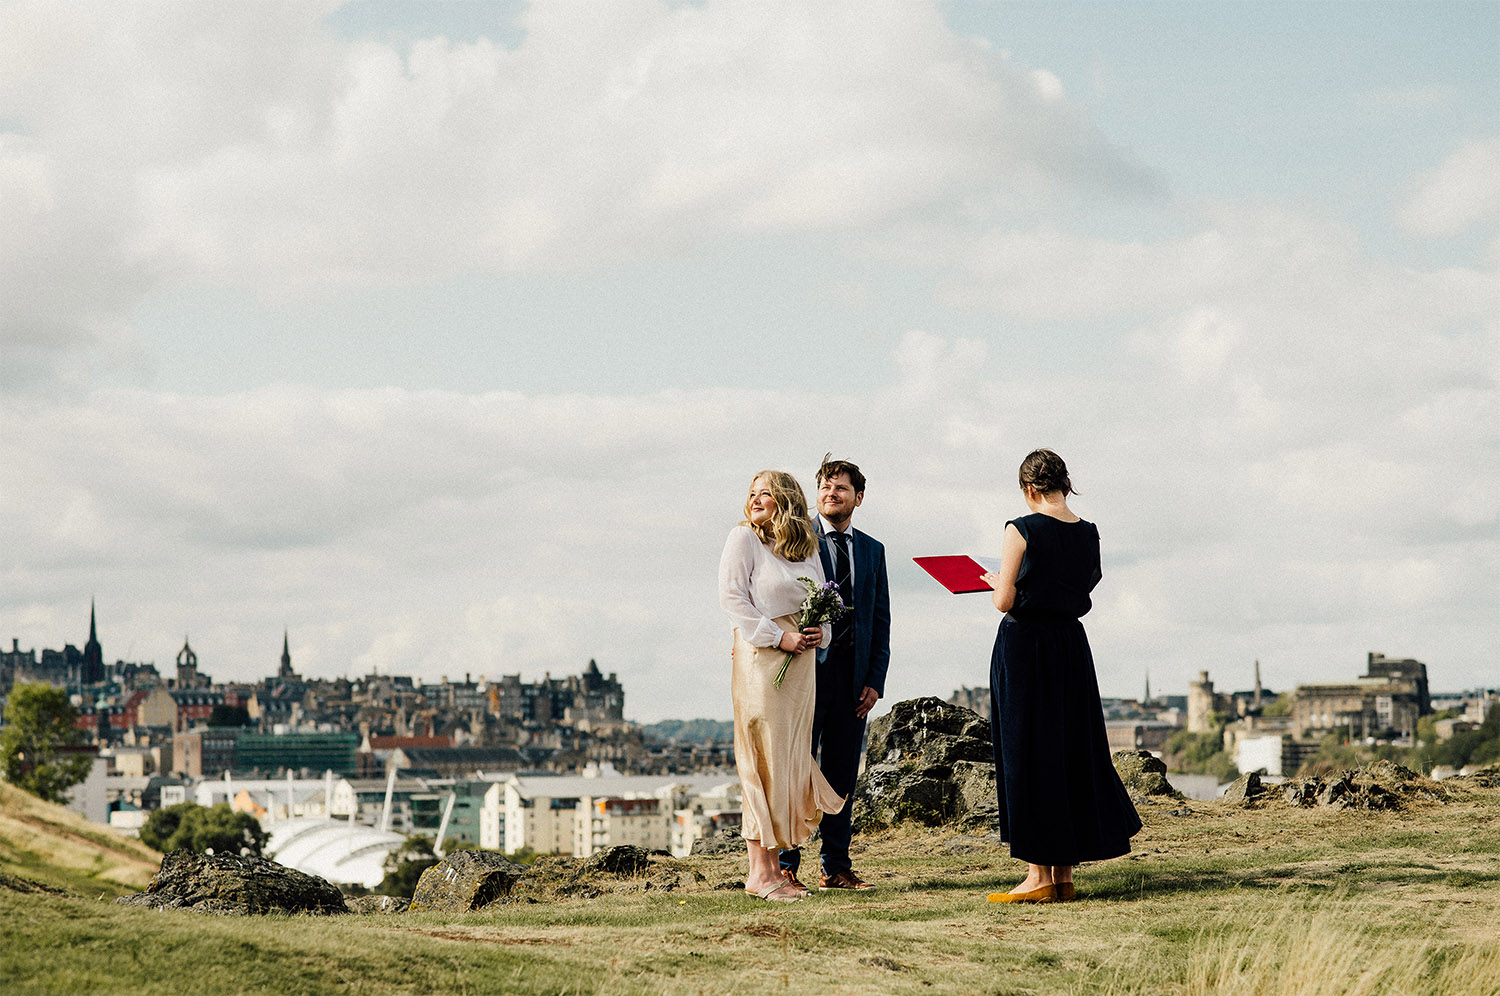 Hannah & Nick standing on top of the hill in Edinburgh ready to say their wedding vows.